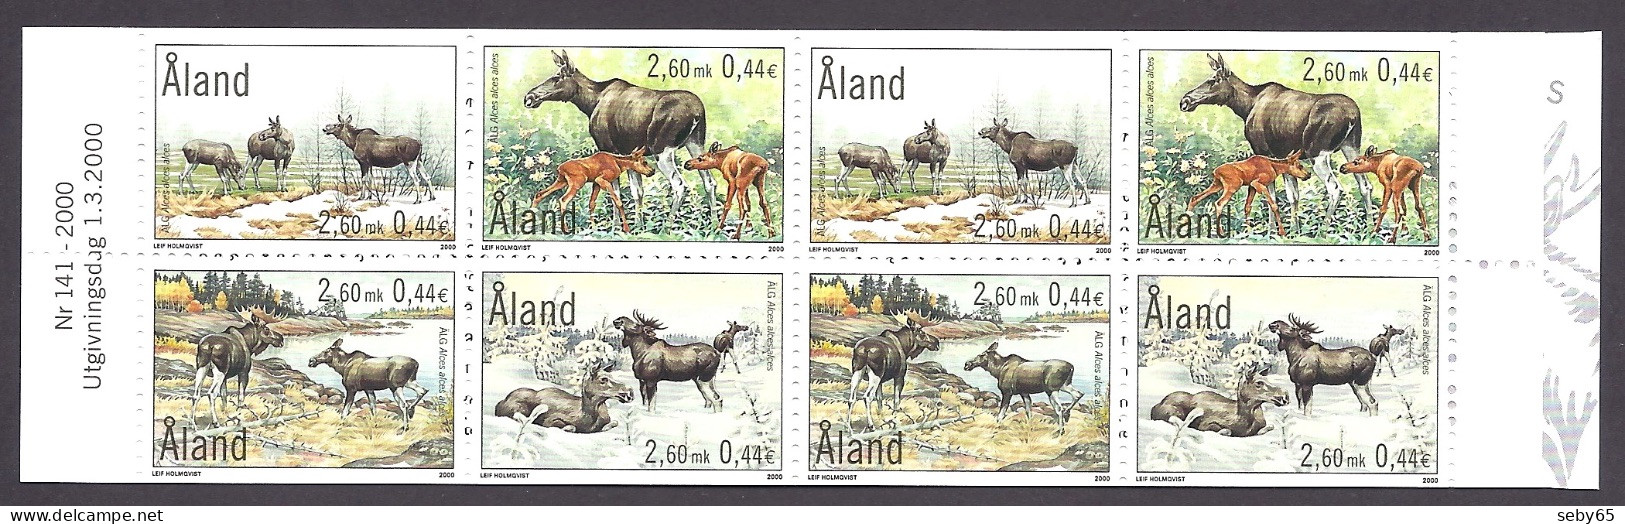 Aland 2000 - Complete Year Set, Full Stamp Collection, With Nice Folder, Mint - MNH - Aland